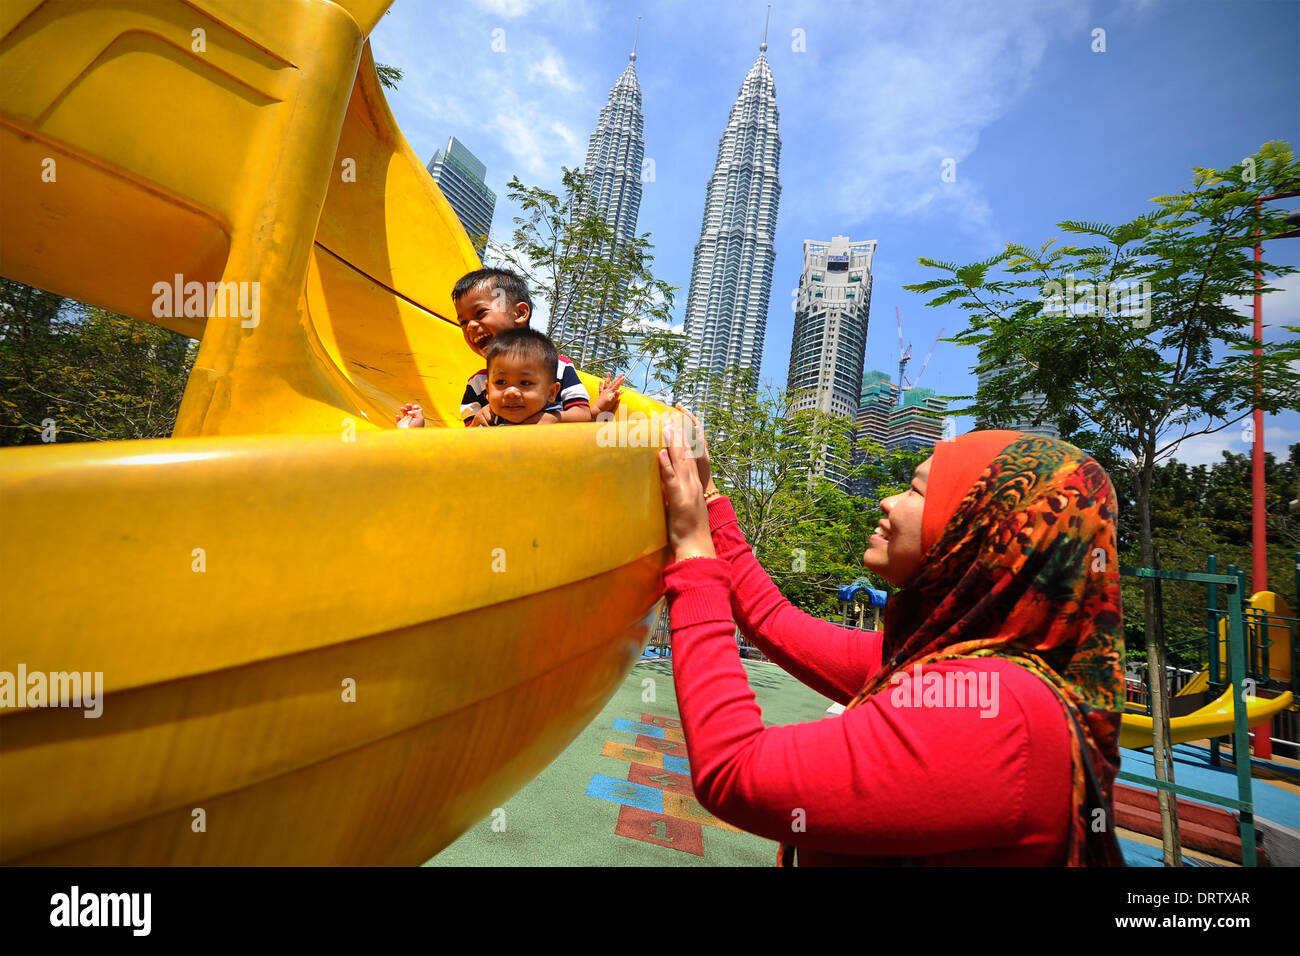 Kuala Lumpur, Malaysia. 1st Feb, 2014. A Muslim women looks on as her children plays at a playground during the second day of Chinese Lunar New Year in Kuala Lumpur, Malaysia, Saturday, February 1, 2014. In Malaysia, during religious festivities there is usually two days public holiday, which other ethnic races will enjoy the holidays. © Joshua Paul/NurPhoto/ZUMAPRESS.com/Alamy Live News Stock Photo